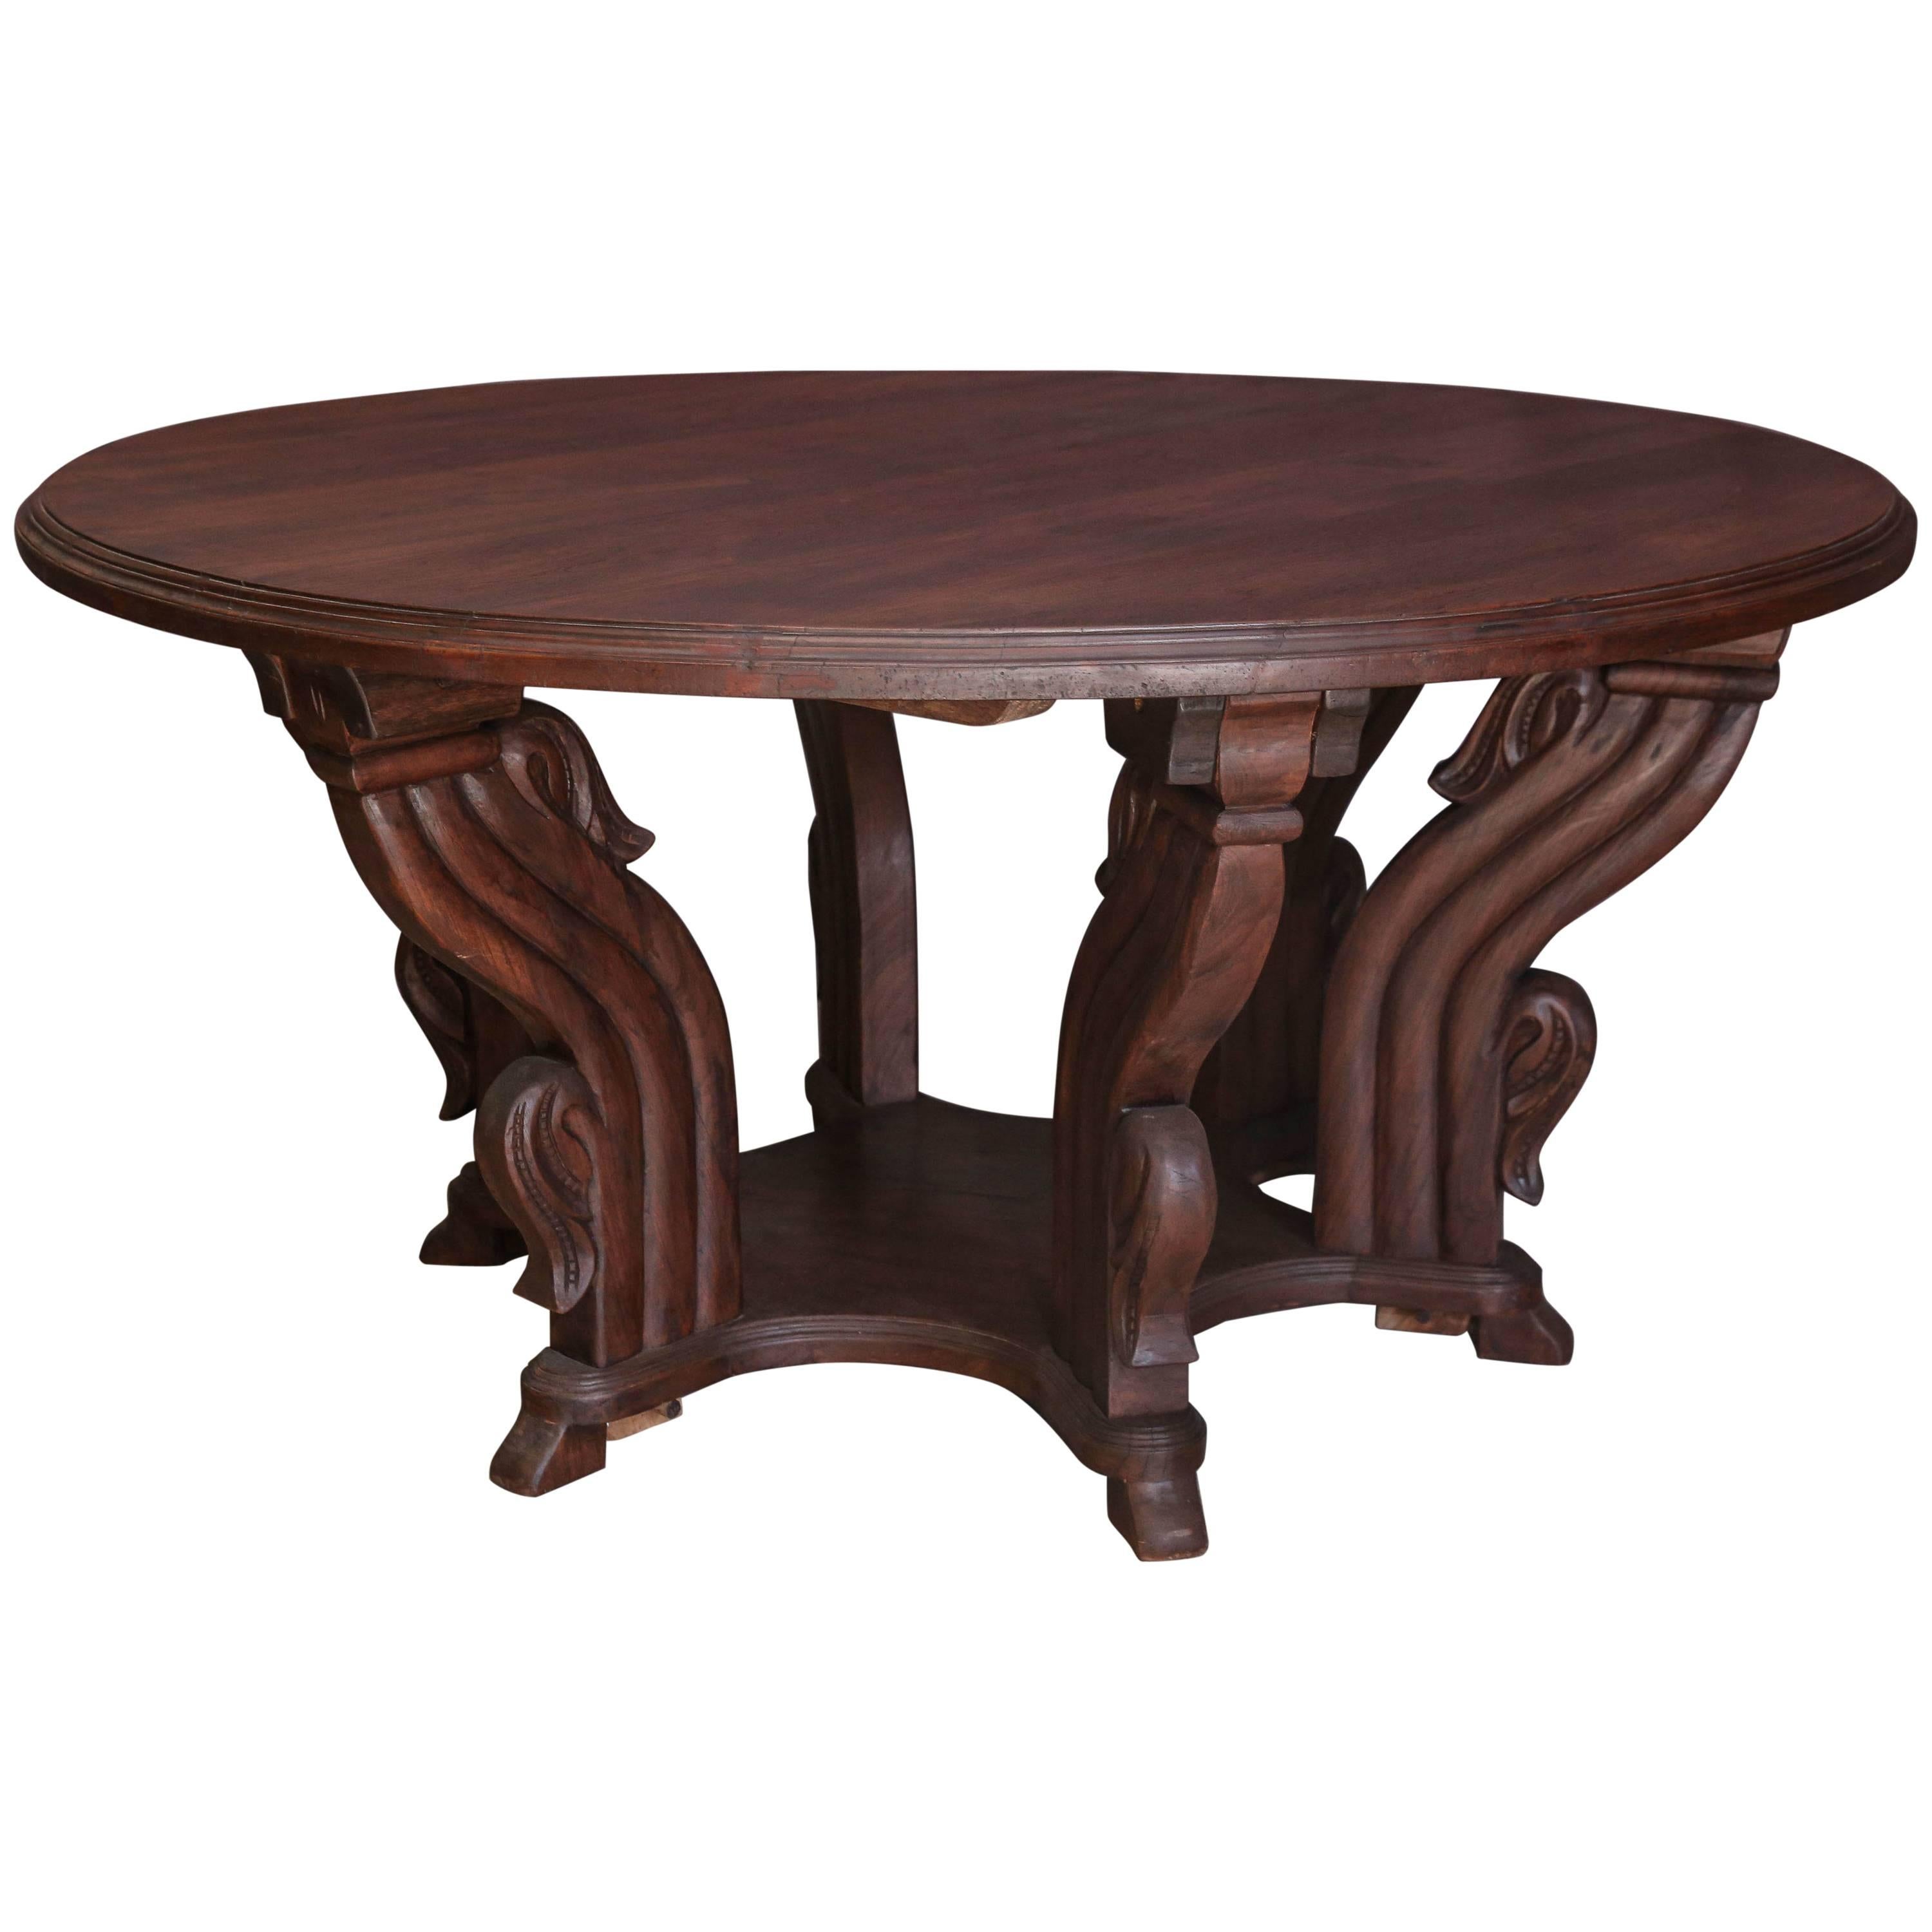 1920s Solid Teak Wood Round Entertainment Table from a Himalayan Valley Plantion For Sale